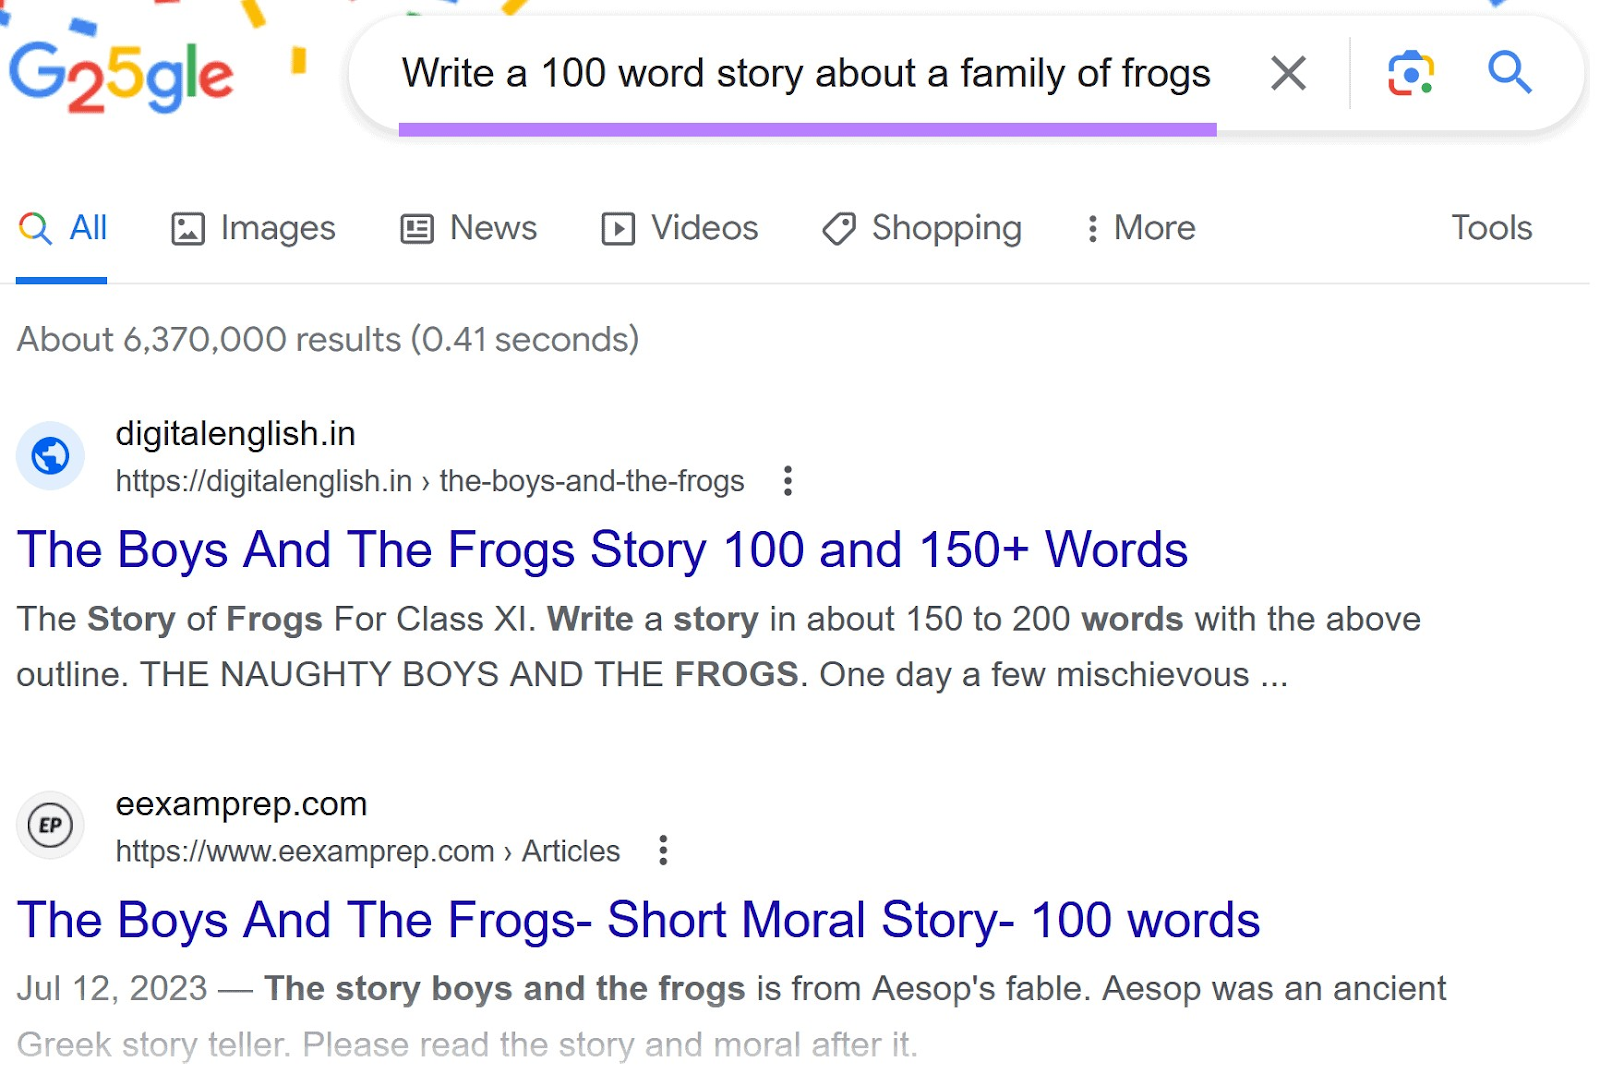 Google SERP for "Write a 100 word story about a family of frogs"